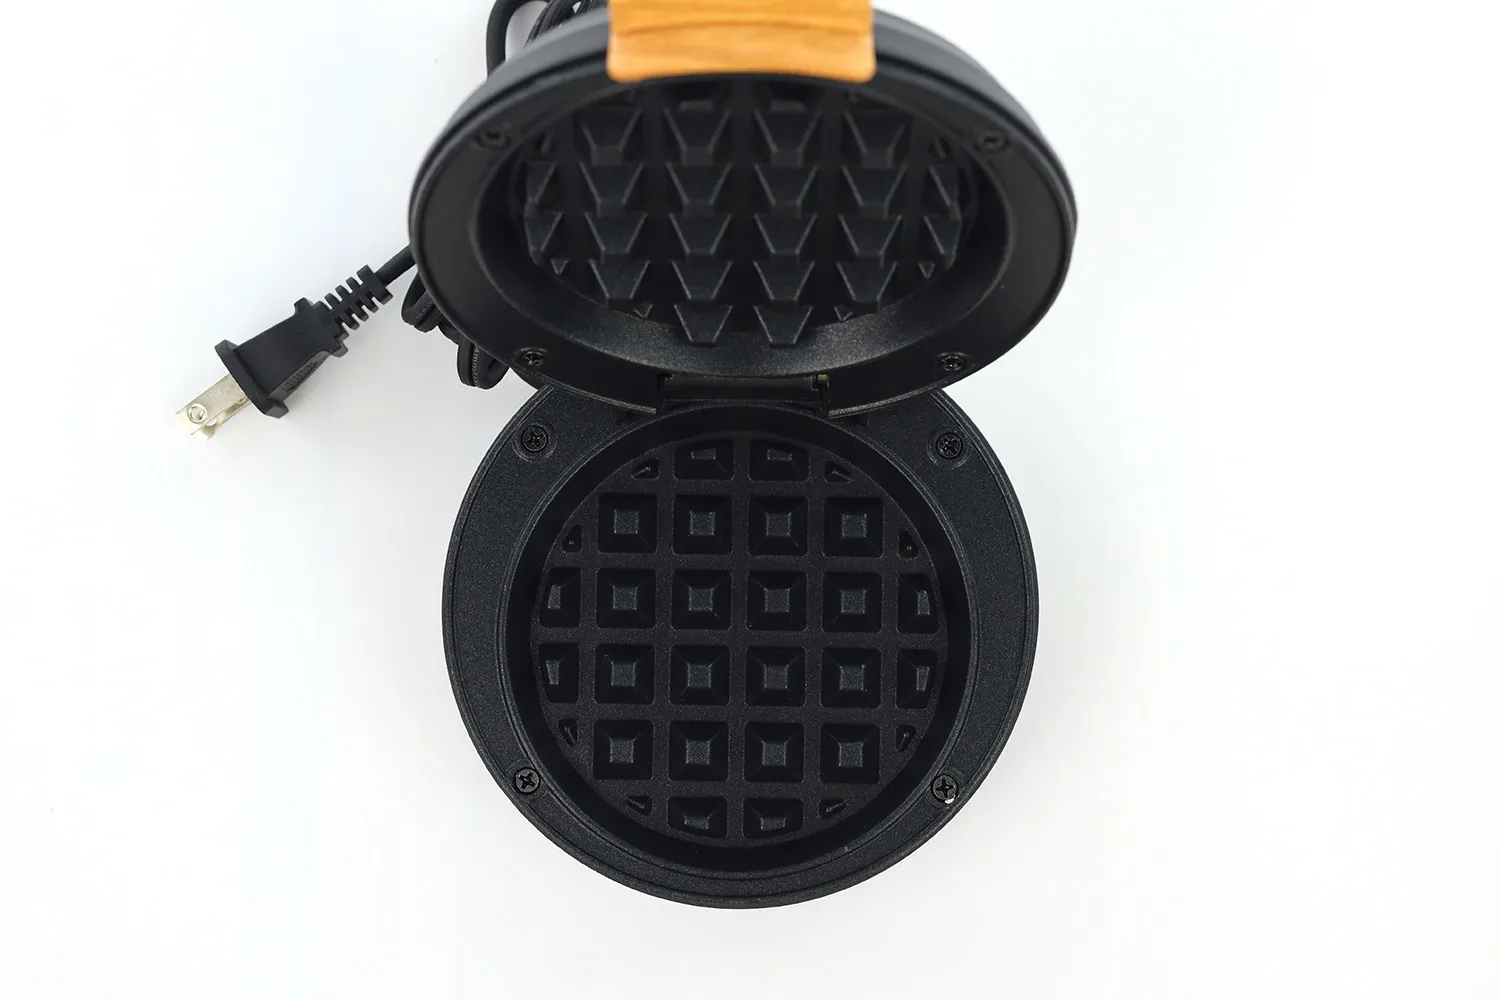 CROWNFUL Mini Waffle Maker Machine, 4 Inch Chaffle Maker with Compact  Design, Easy to Clean, Non-Stick Surface, Recipe Guide Included, Perfect  for Breakfast, Dessert, Sandwich, or Other Snacks, Black - Yahoo Shopping